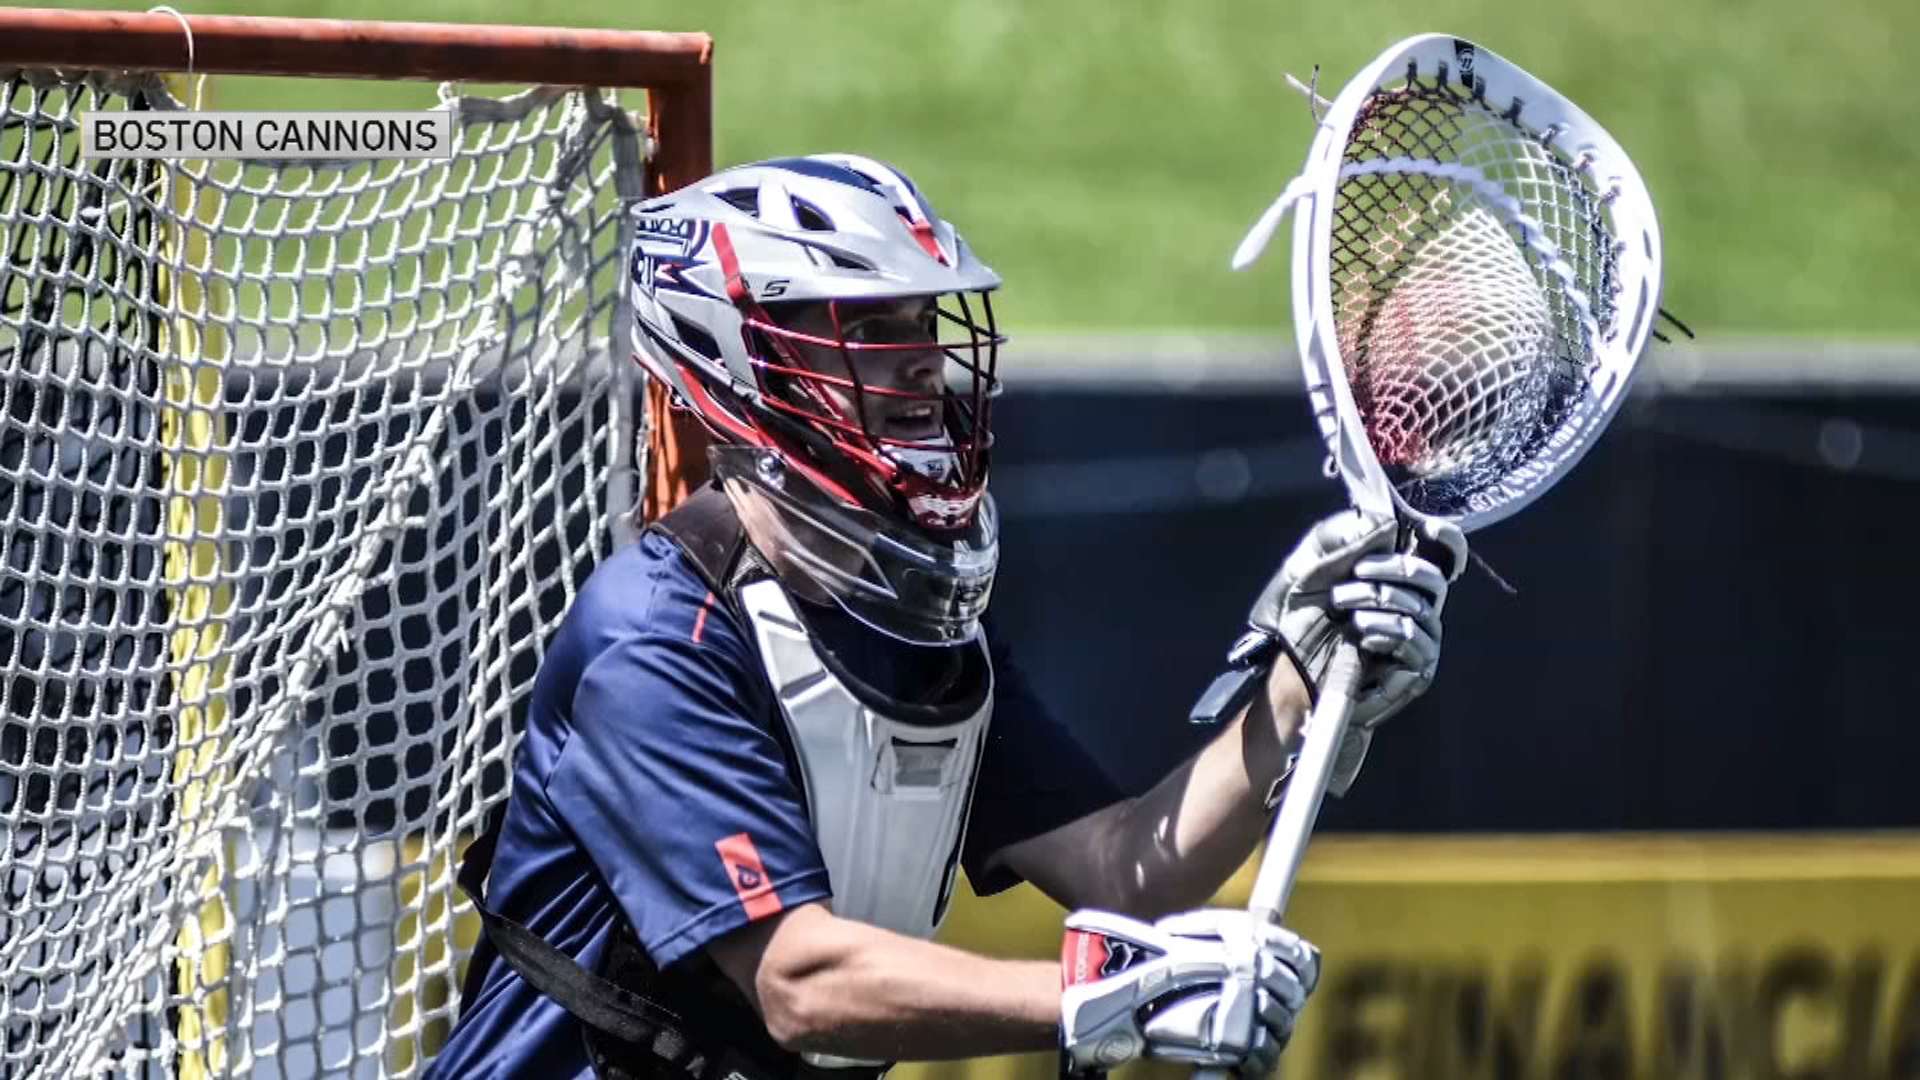 Nick Marrocco Provides a Look Inside the Cannons - Lacrosse All Stars